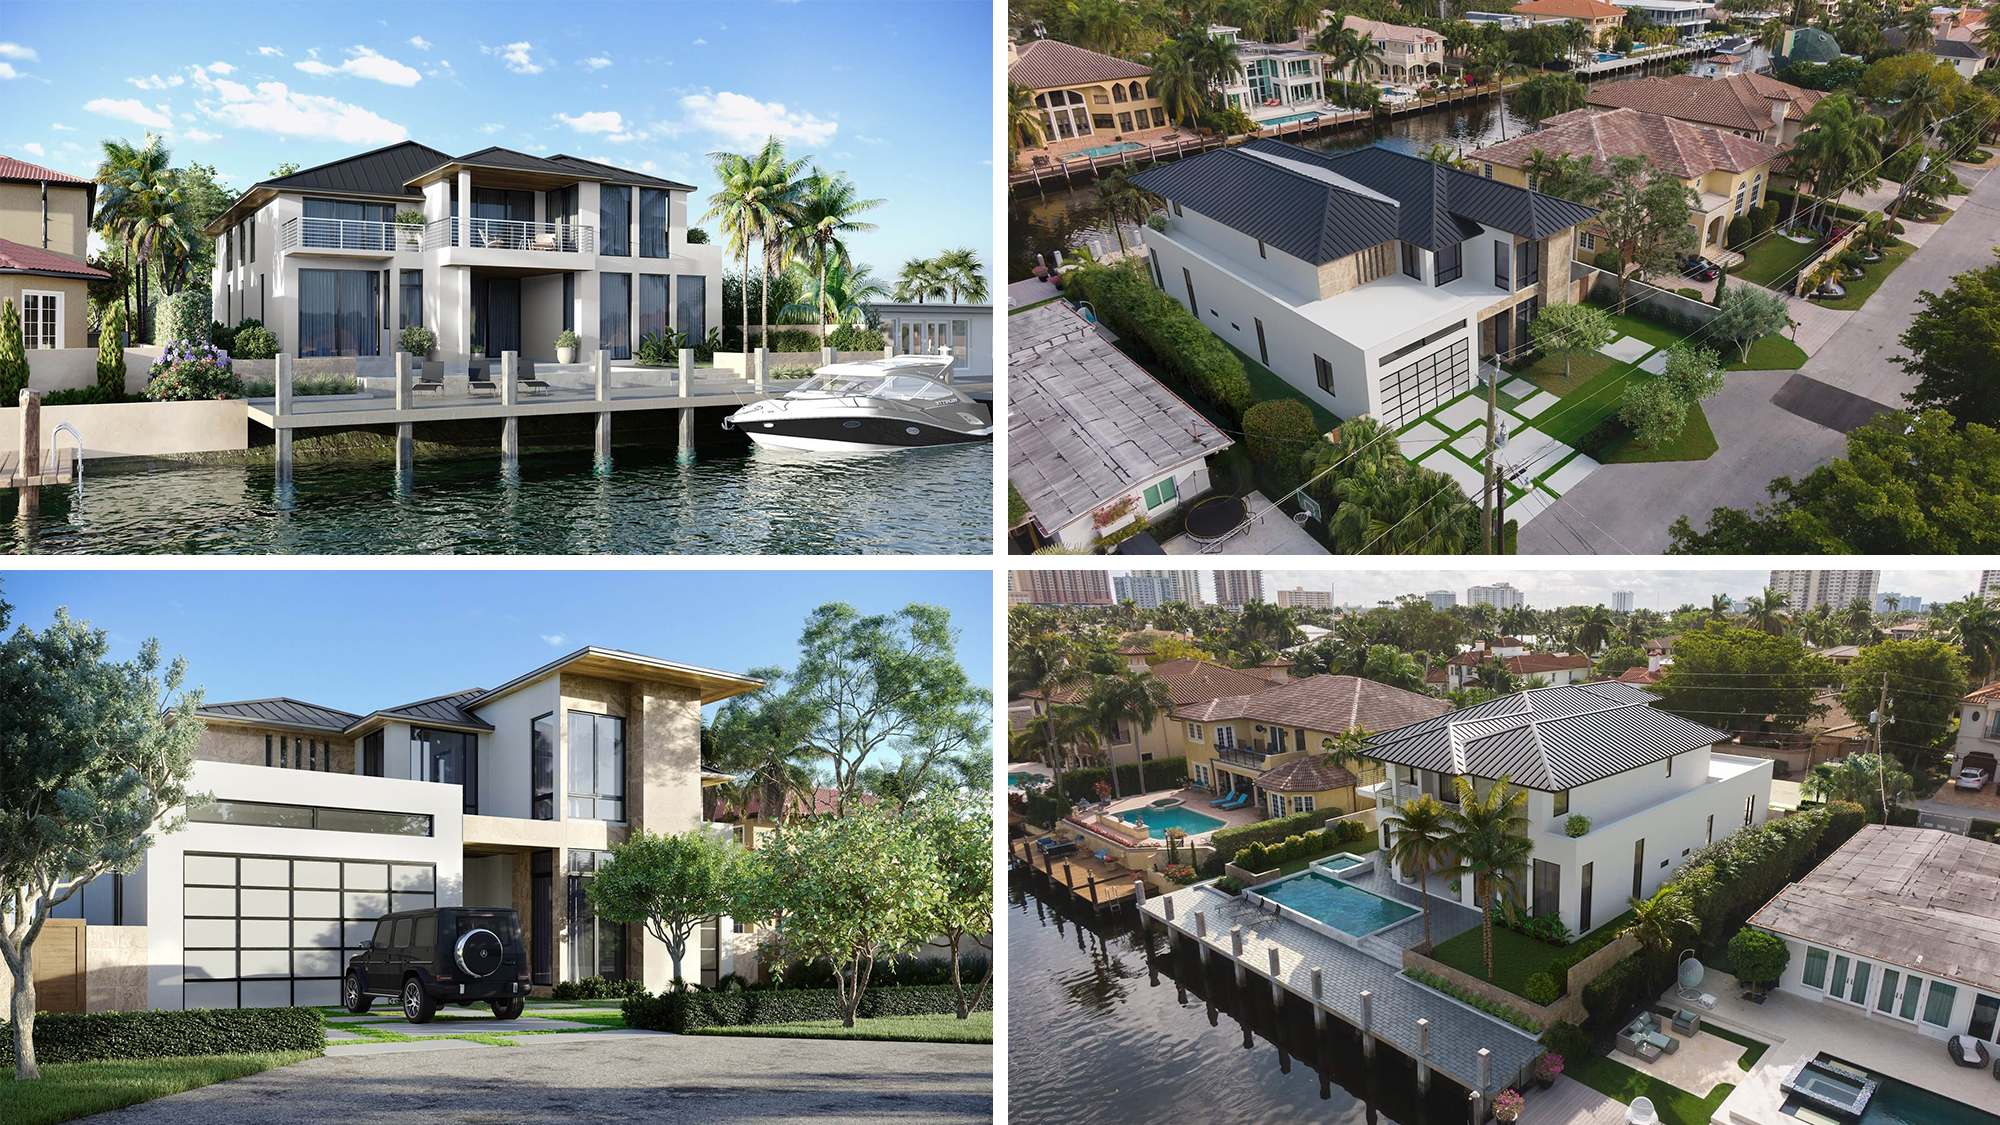 3D Renderings for a House in Florida